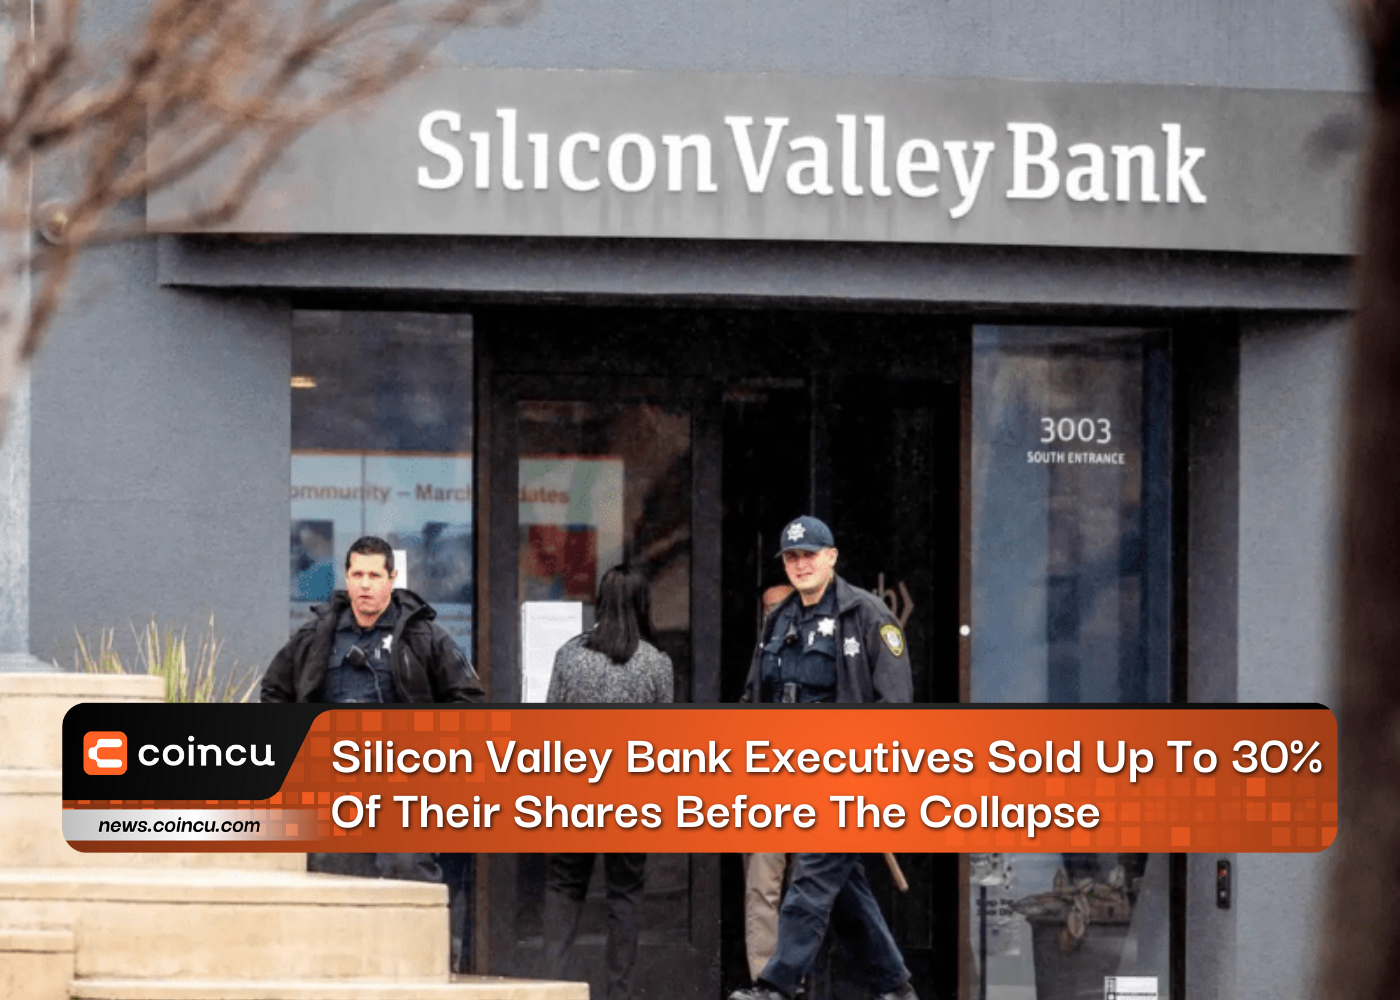 Silicon Valley Bank Executives Sold Up To 30% Of Their Shares Before The Collapse